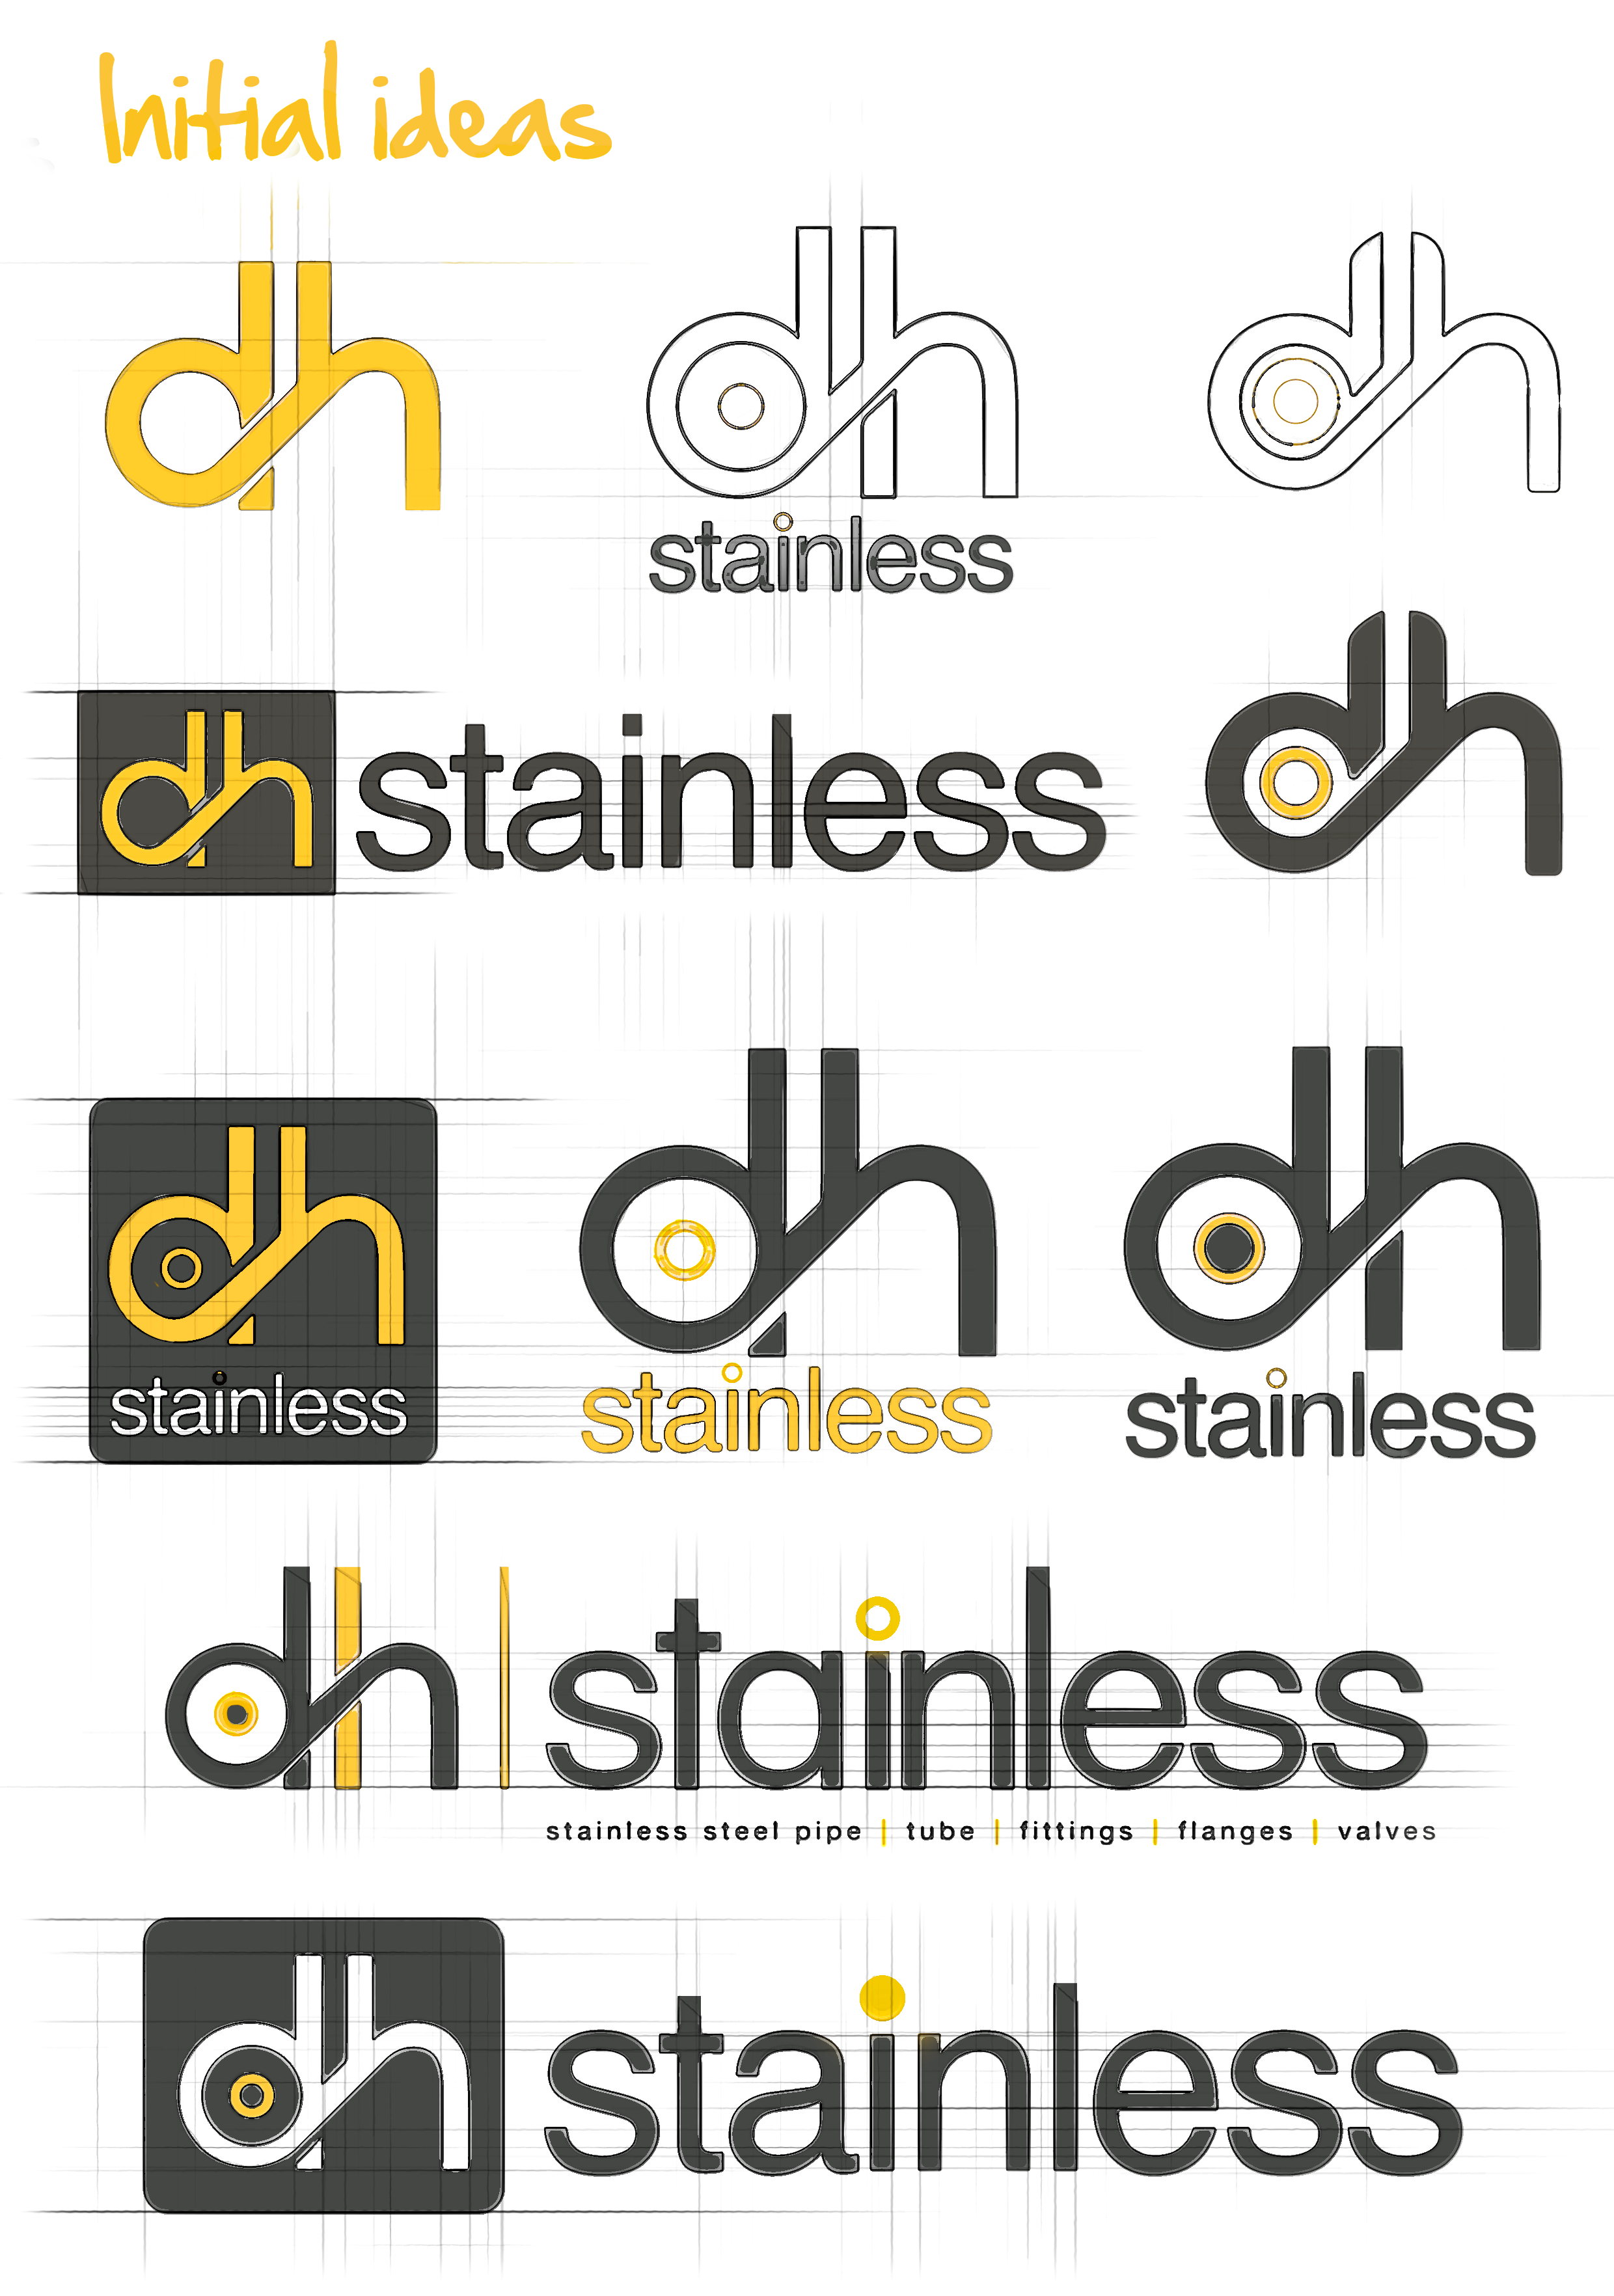 Visual concepts for the new DH Stainless logo